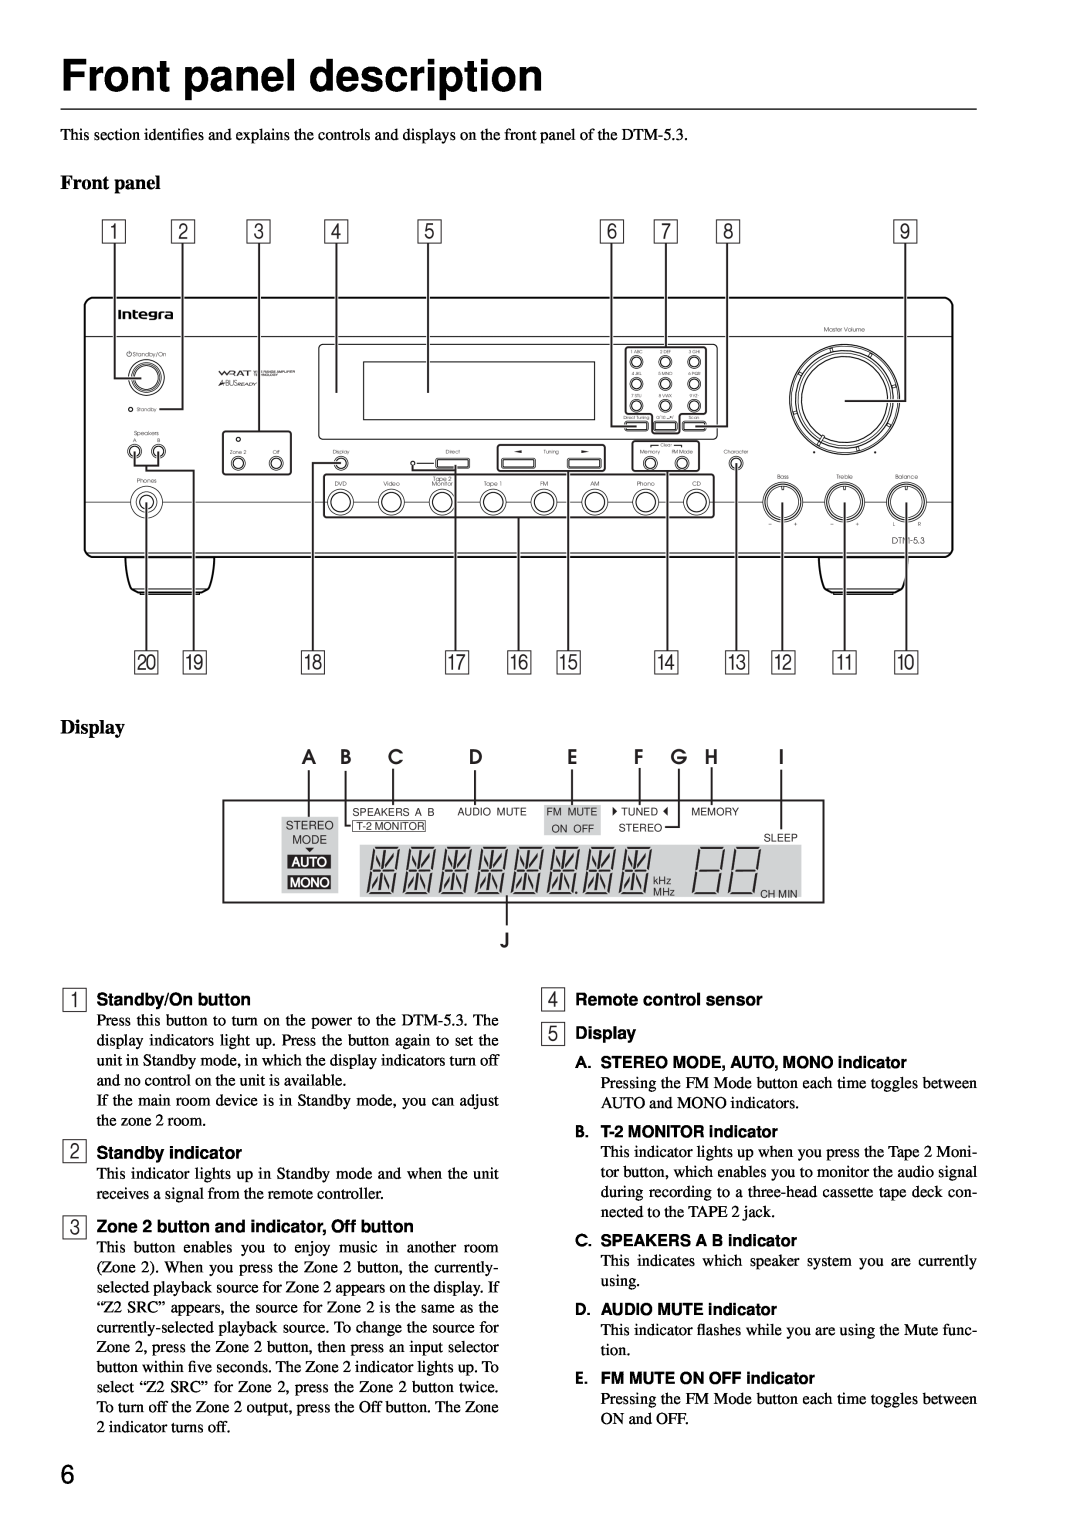 Integra DTM-5.3 appendix Front panel description, Standby/On button, Standby indicator, Remote control sensor Display 